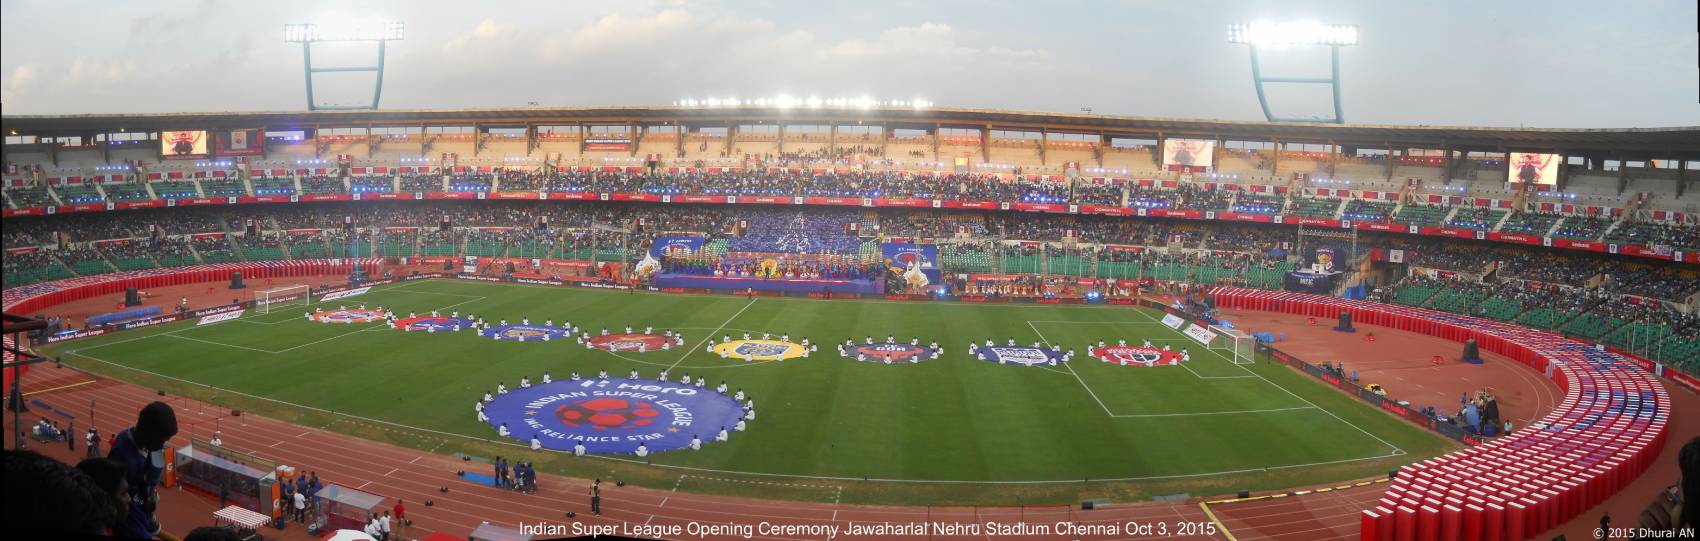 Indian Super League 2015 opening